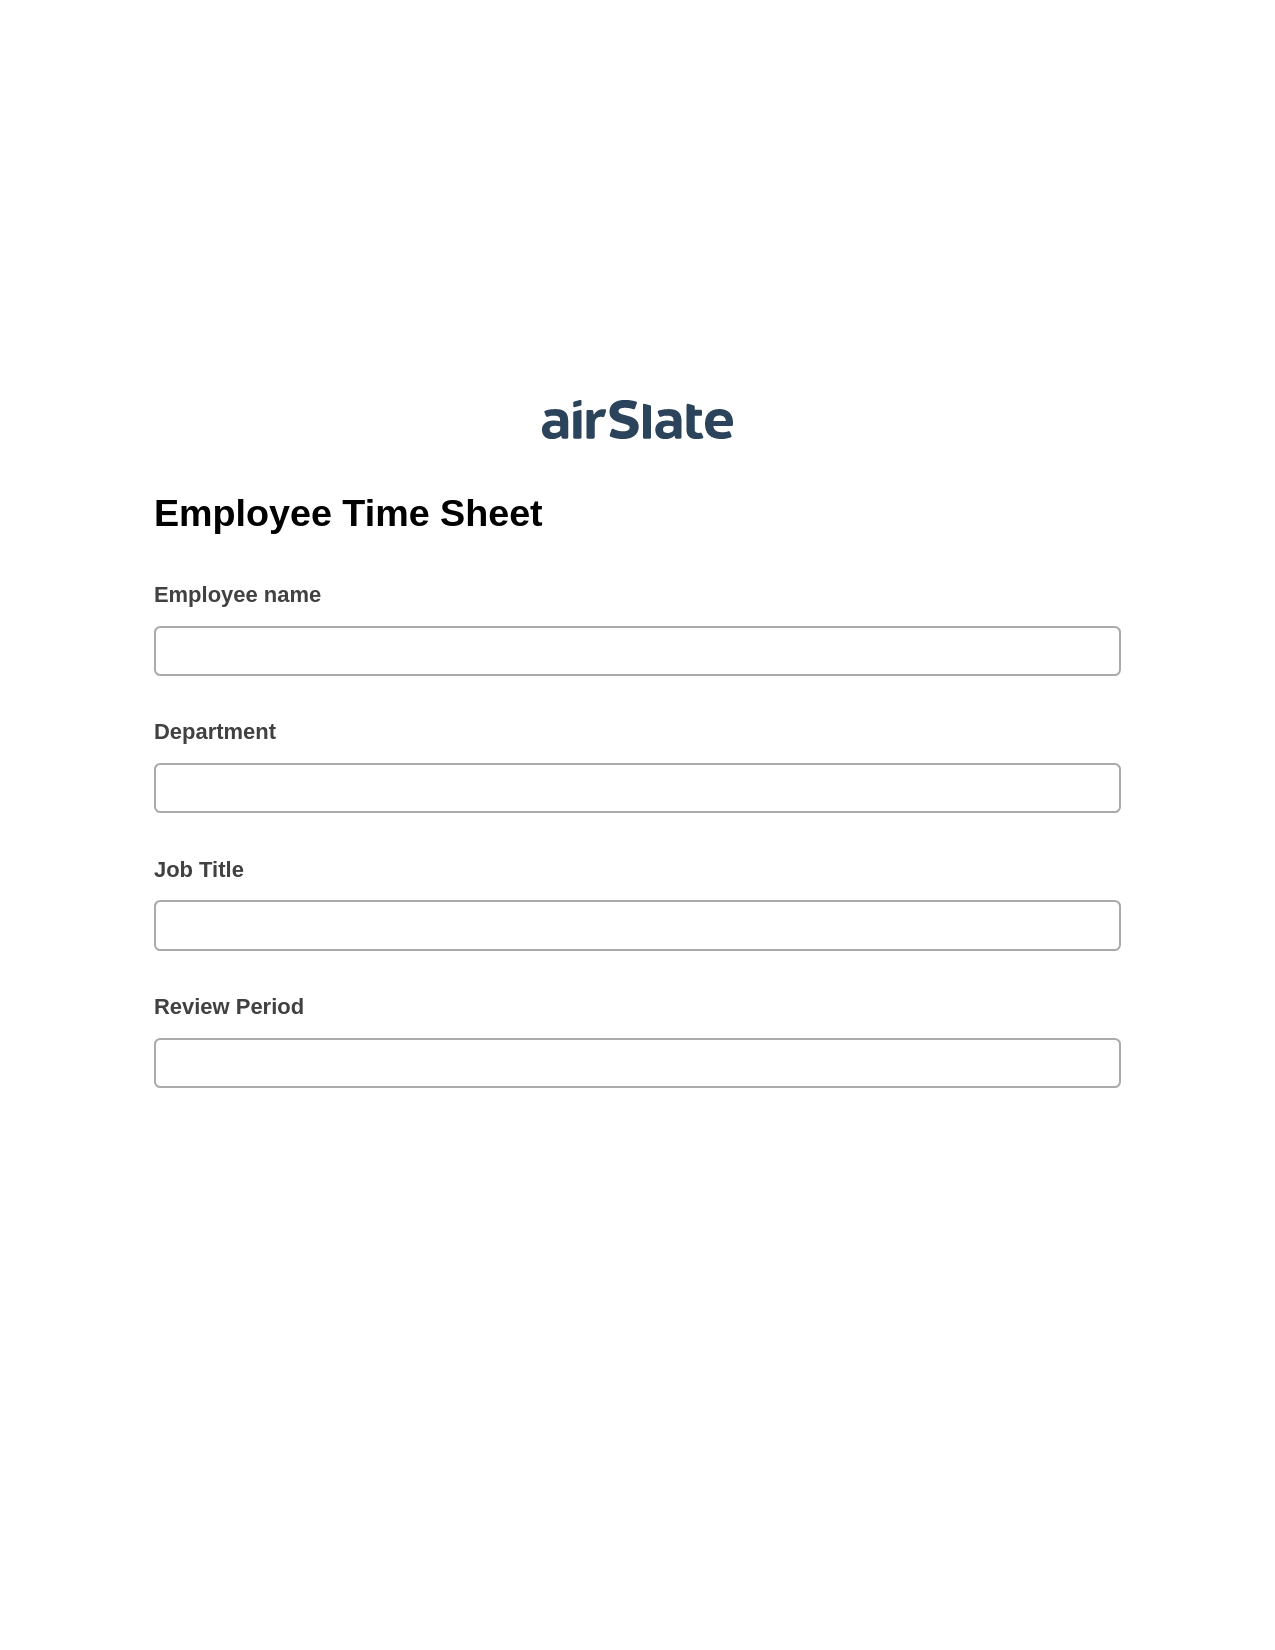 Multirole Employee Time Sheet Prefill from NetSuite records, Send a Slate to MS Dynamics 365 Contact Bot, Post-finish Document Bot